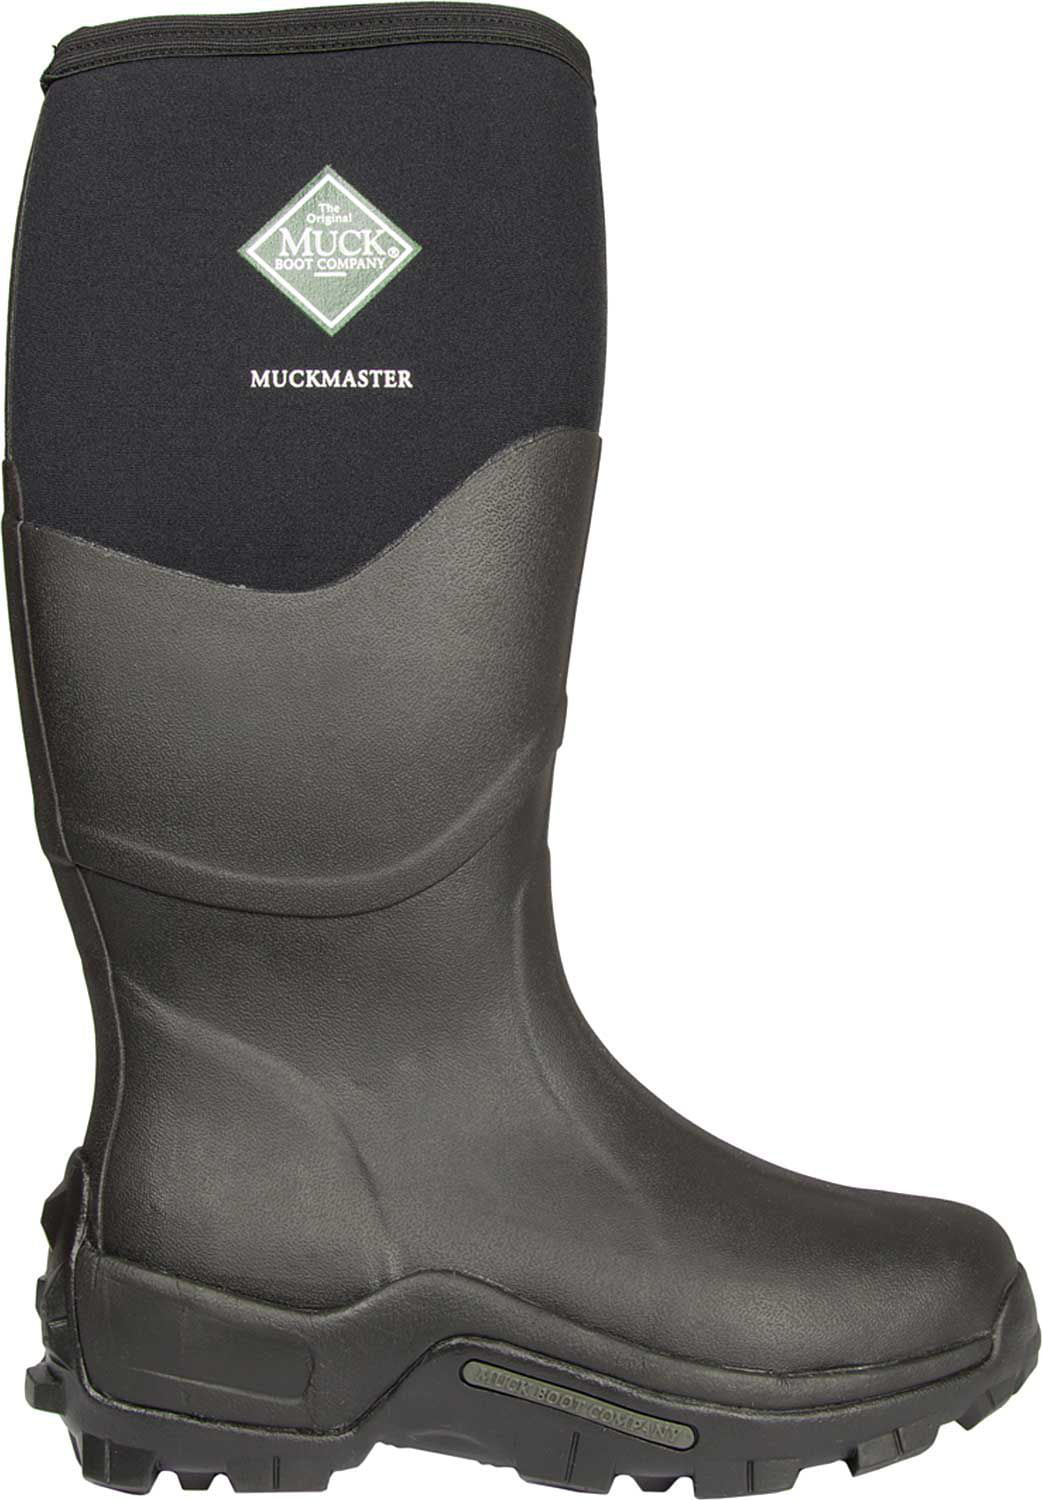 black friday sales on muck boots